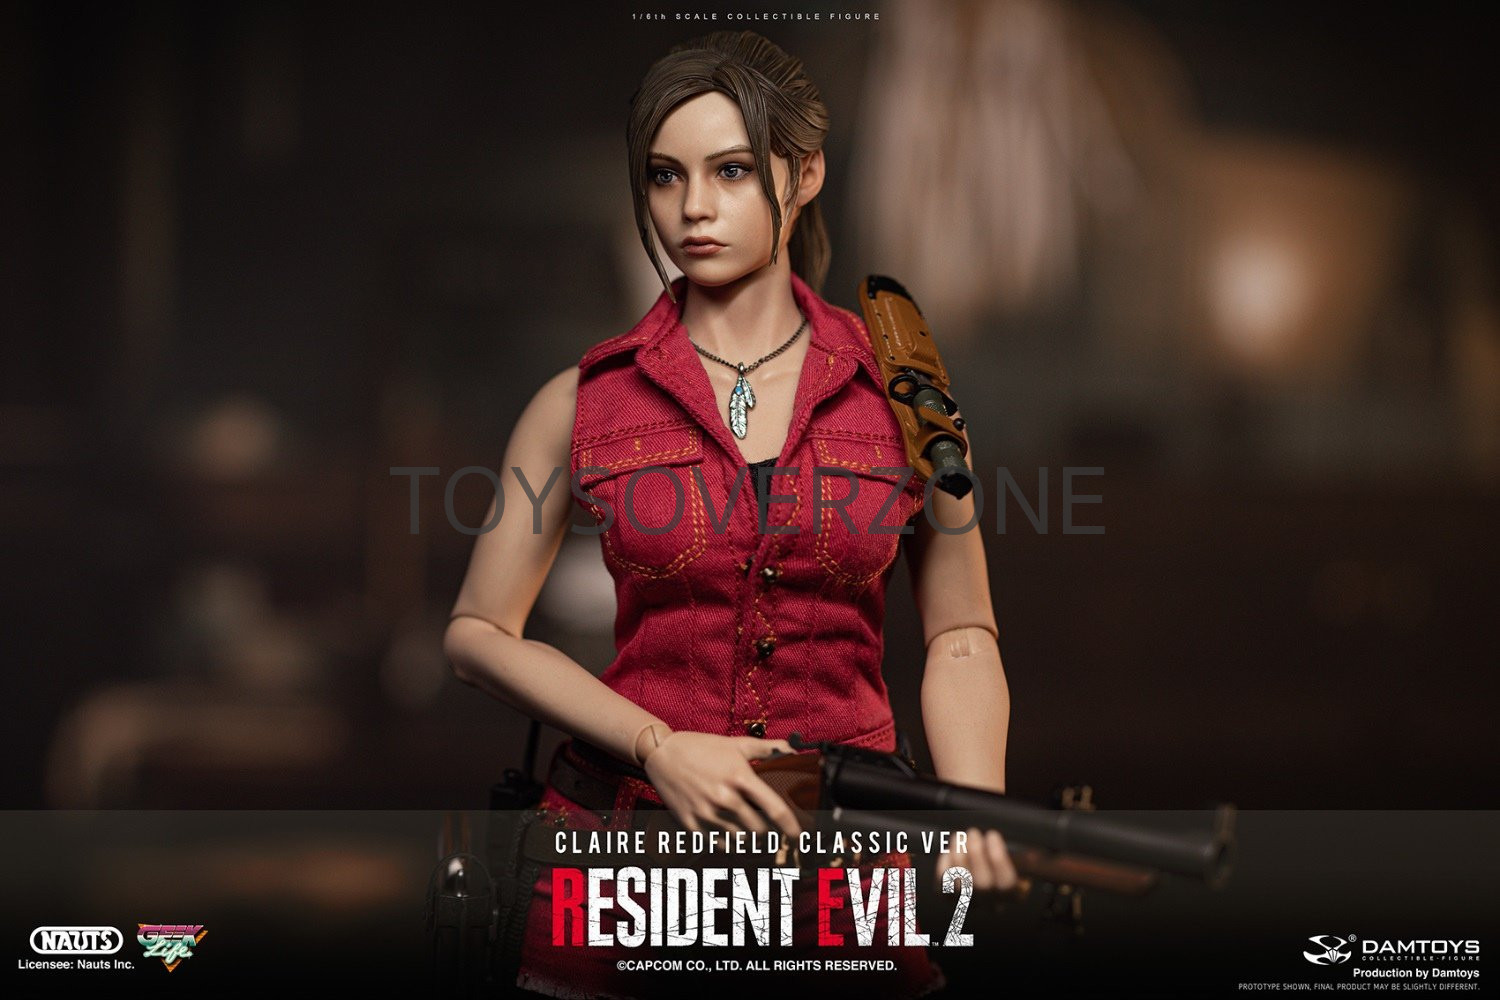 Nauts X Damtoys 16 Resident Evil 2 Claire Redfield Classic Ver Dms038 7150